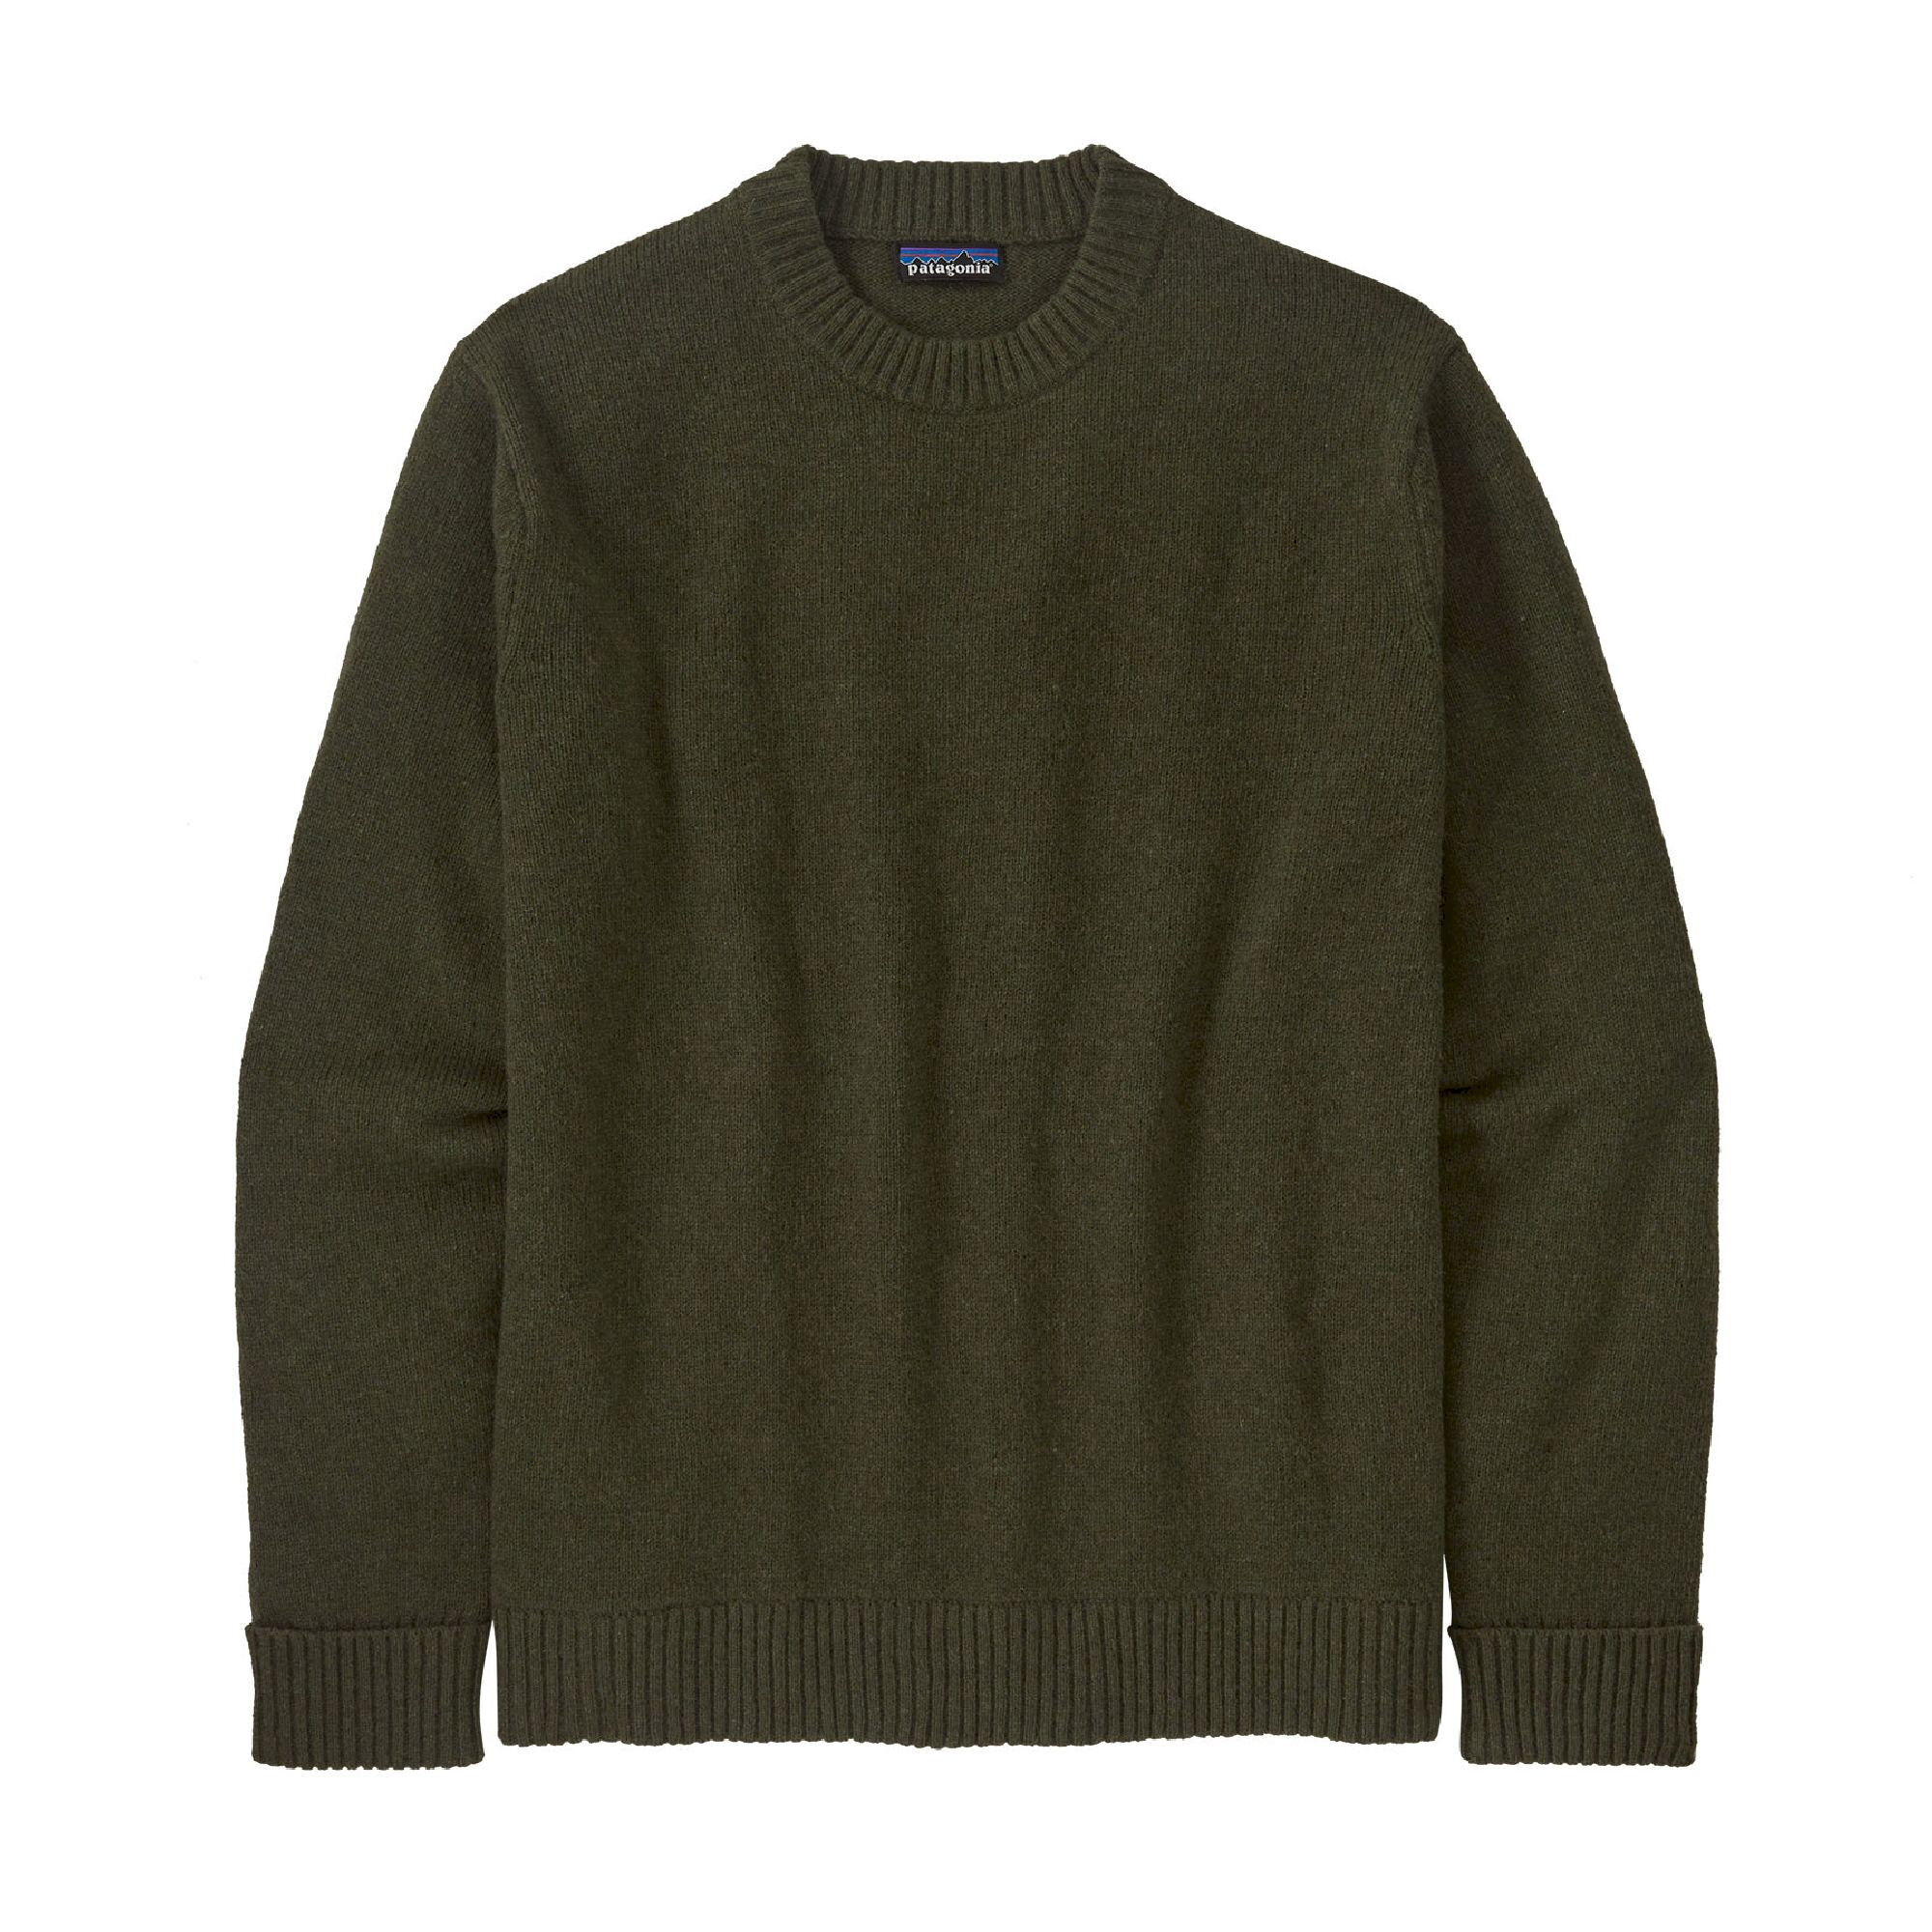 Patagonia Recycled Wool Sweater - Jumper - Men's